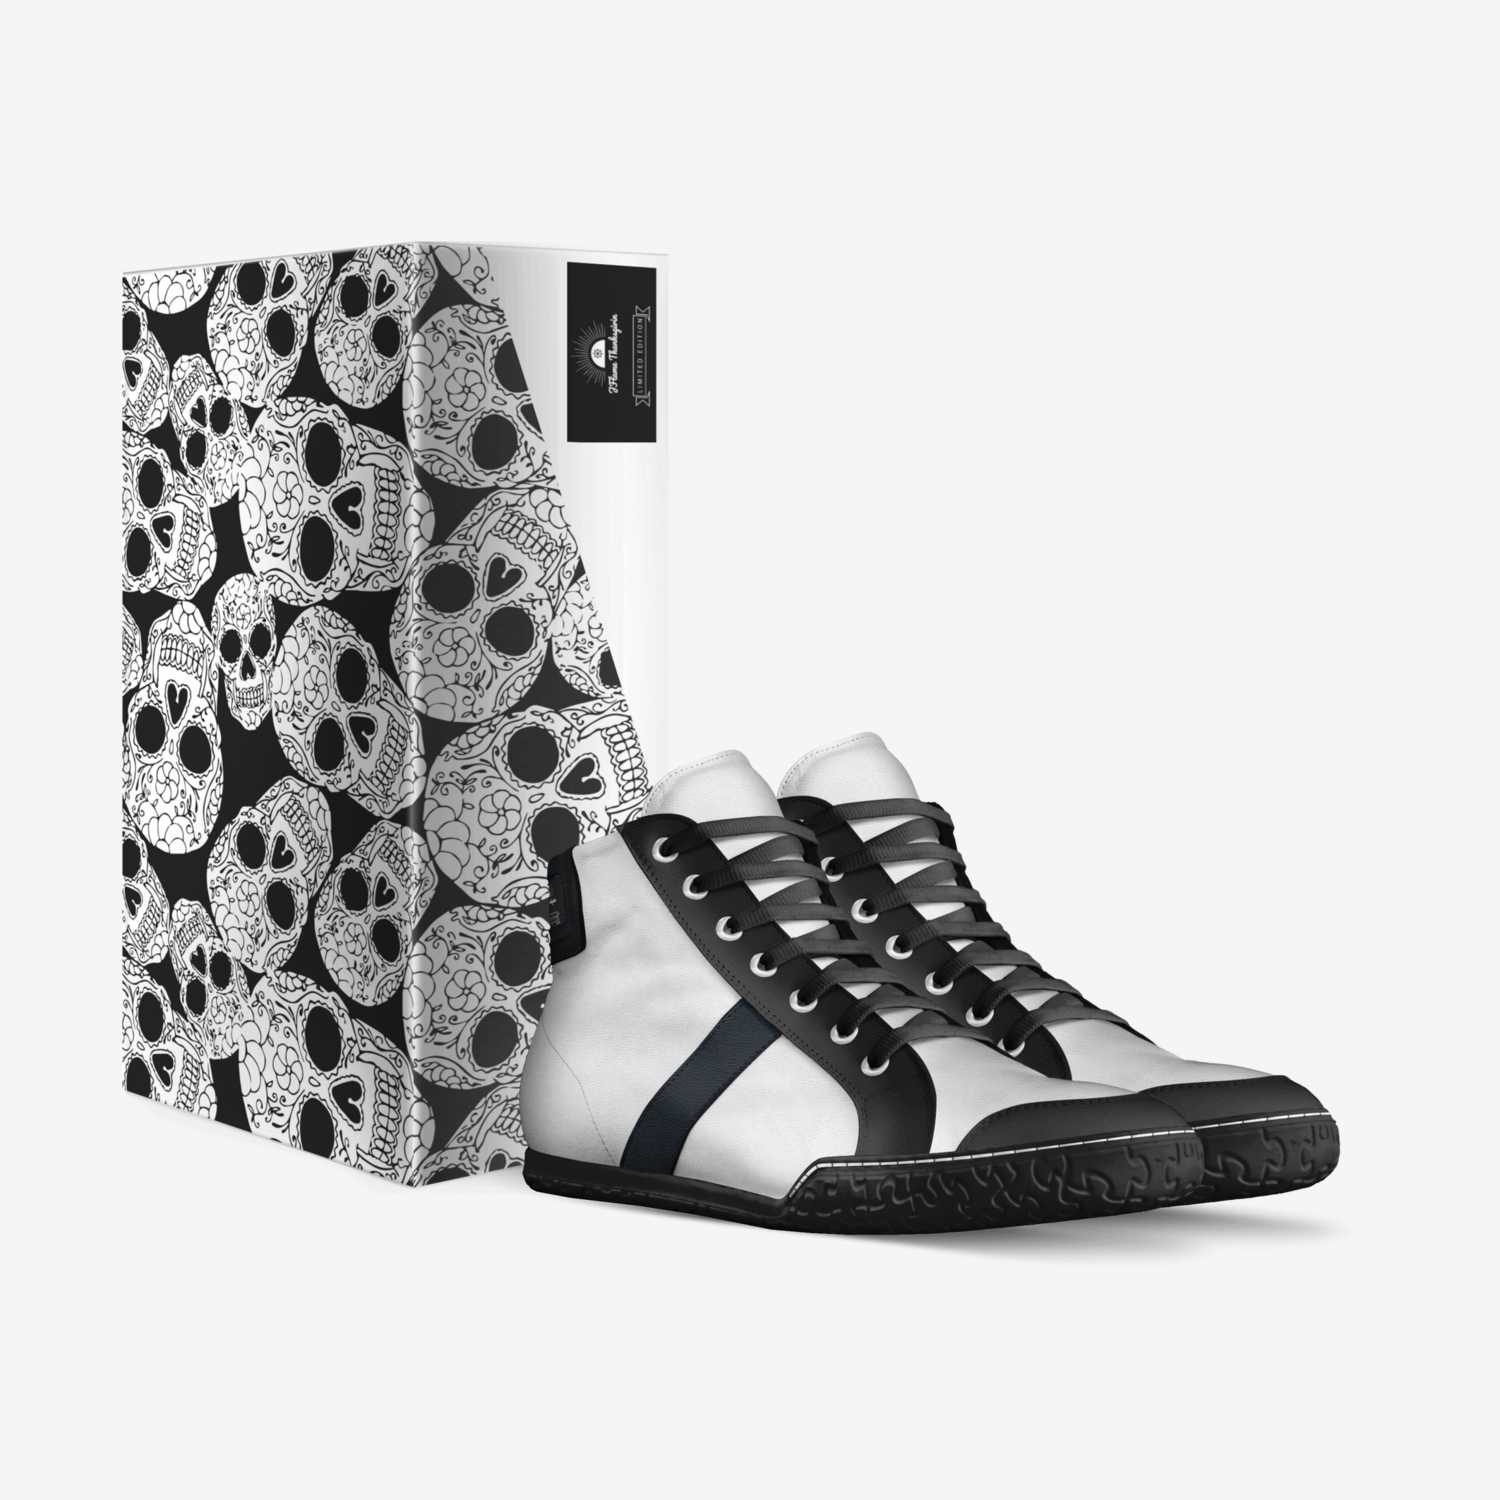 White&Black Flame custom made in Italy shoes by Jamarien Stuckman | Box view